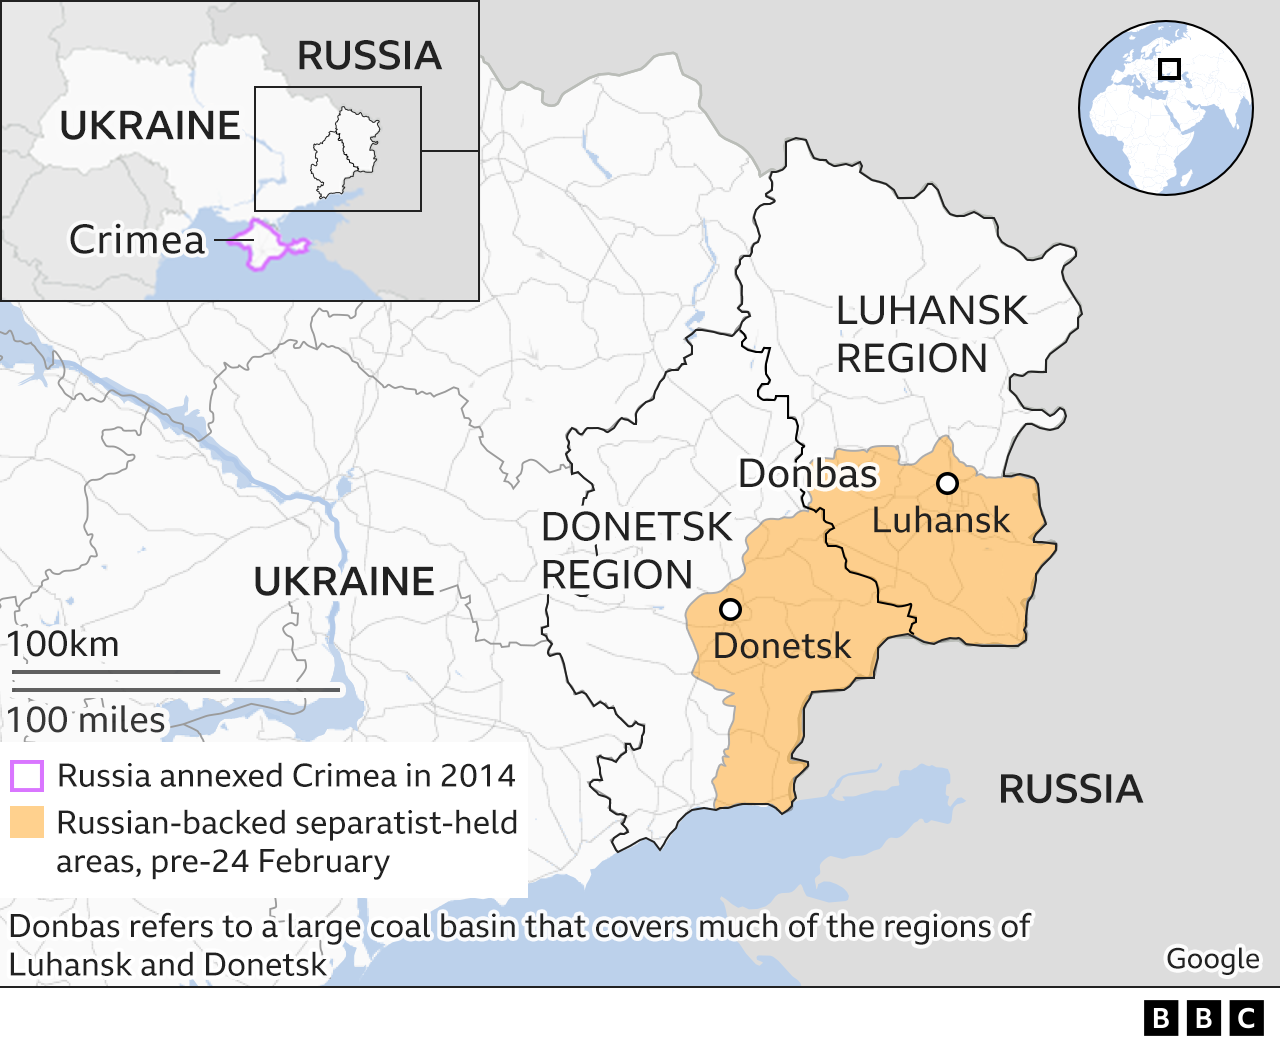 Russia is trying to capture Donbas